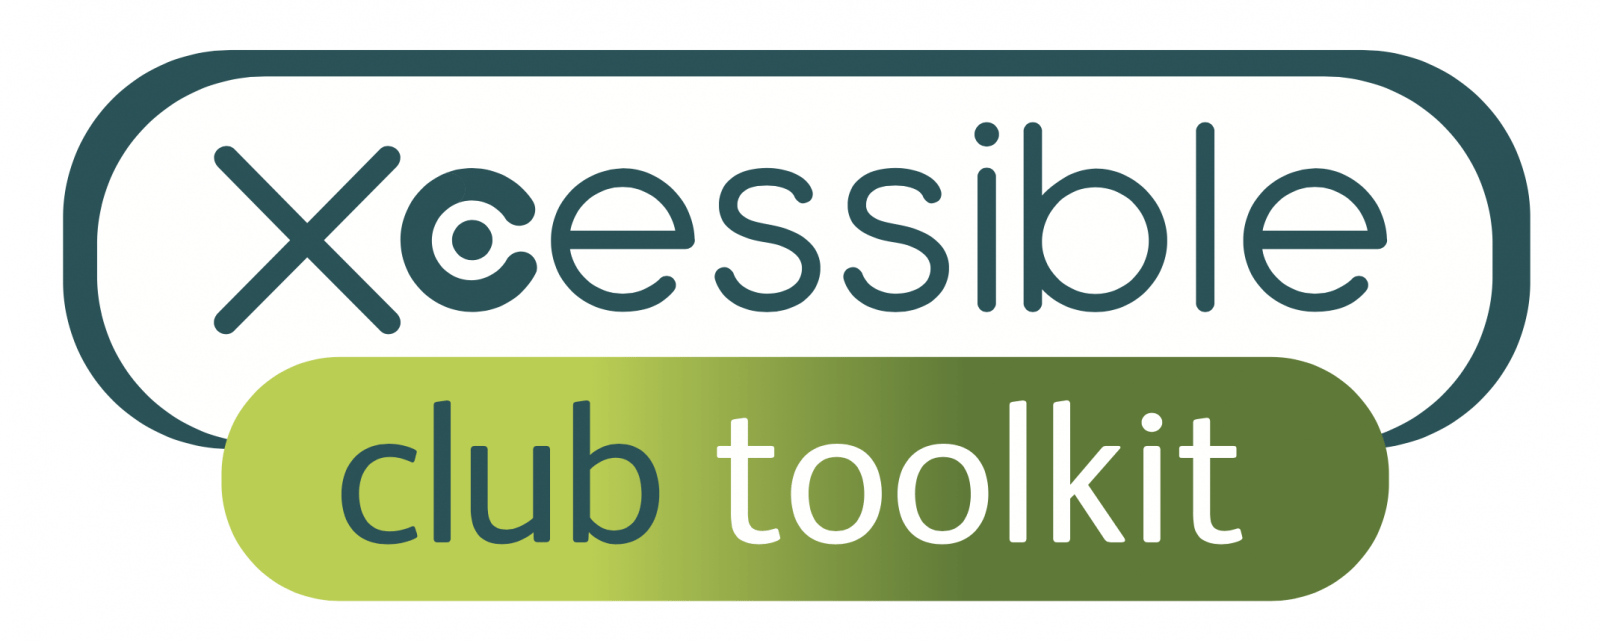 Xcessible Club Toolkit Logo